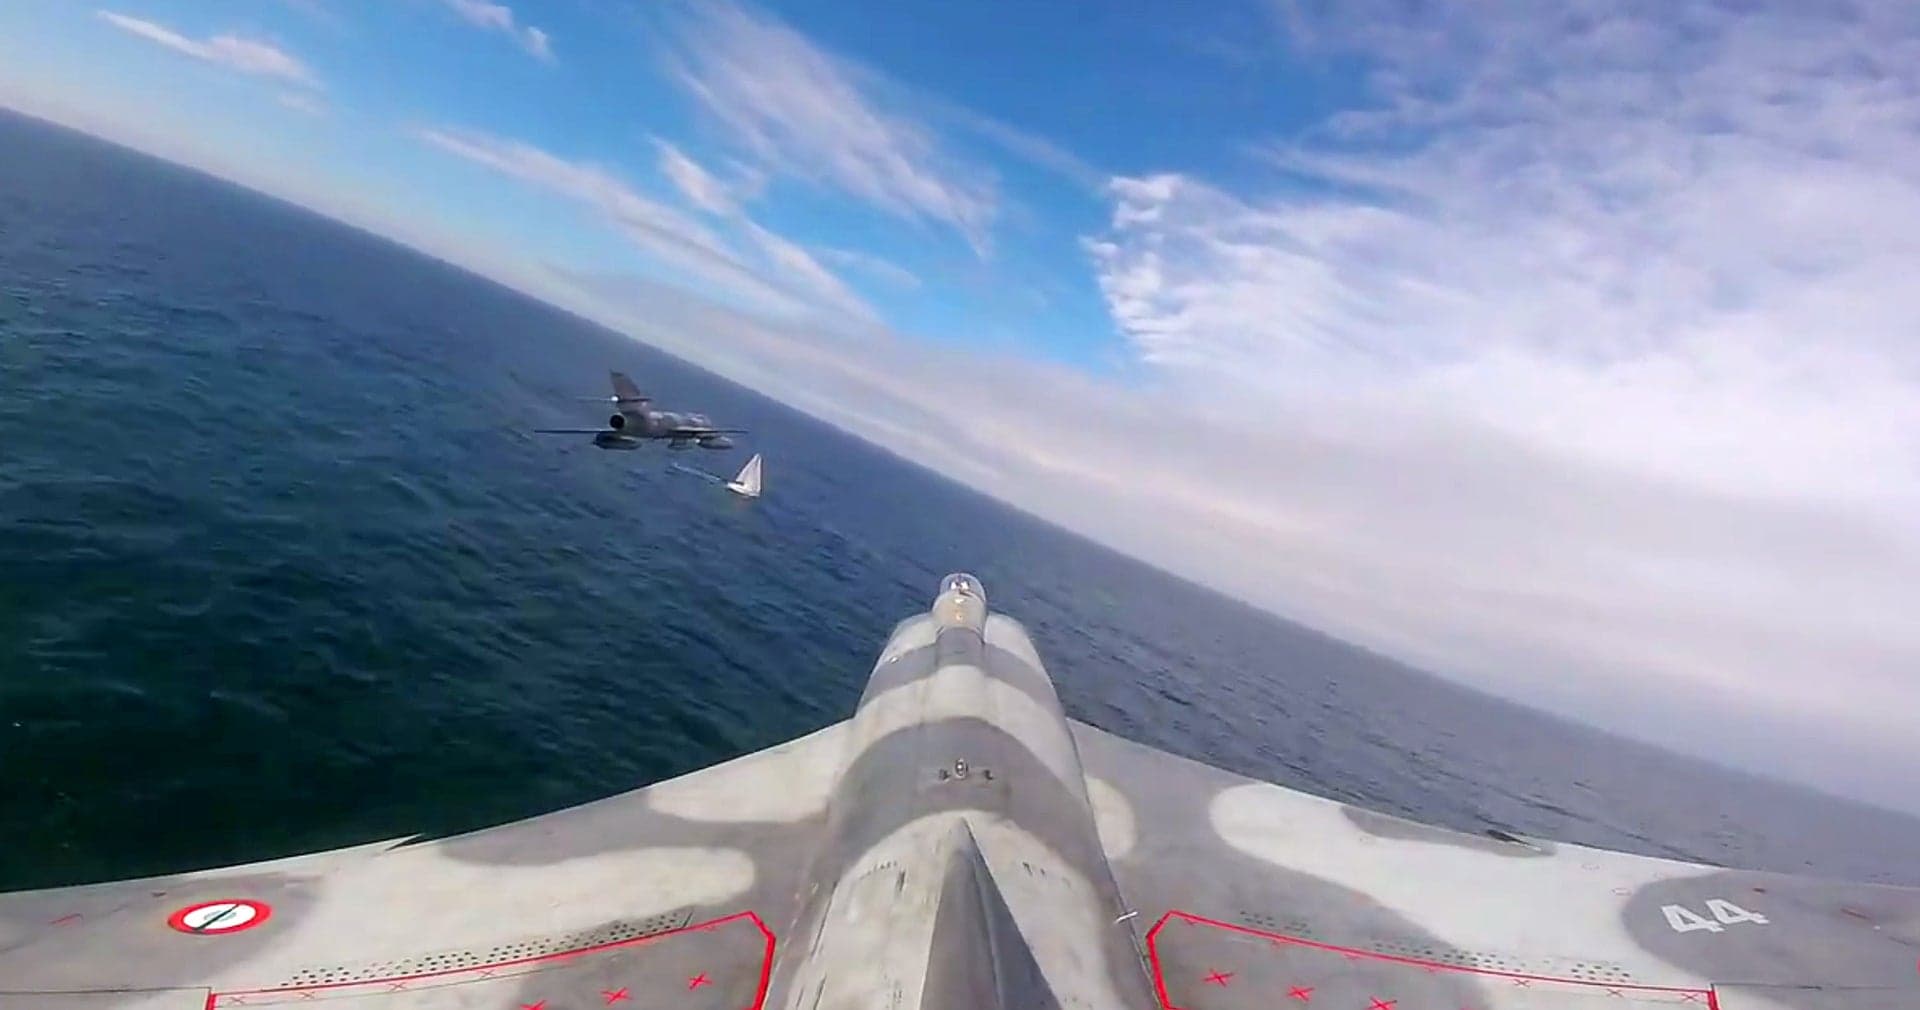 Say Au Revoir To The Super Étendard With This Heart-Pounding Video